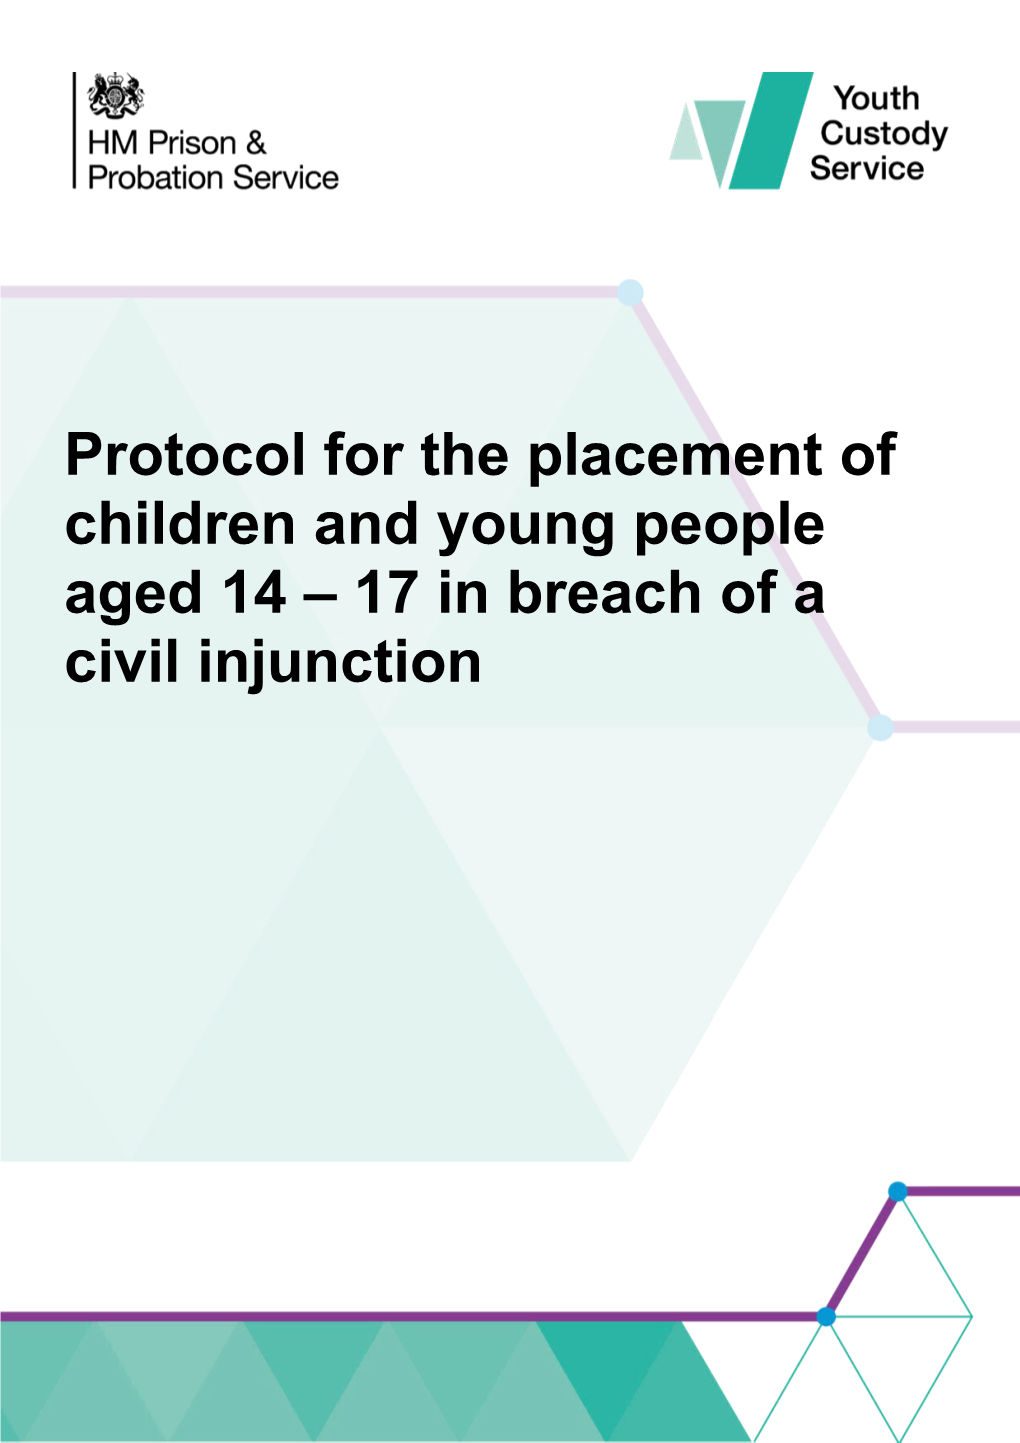 Youth Custody Service Report Template